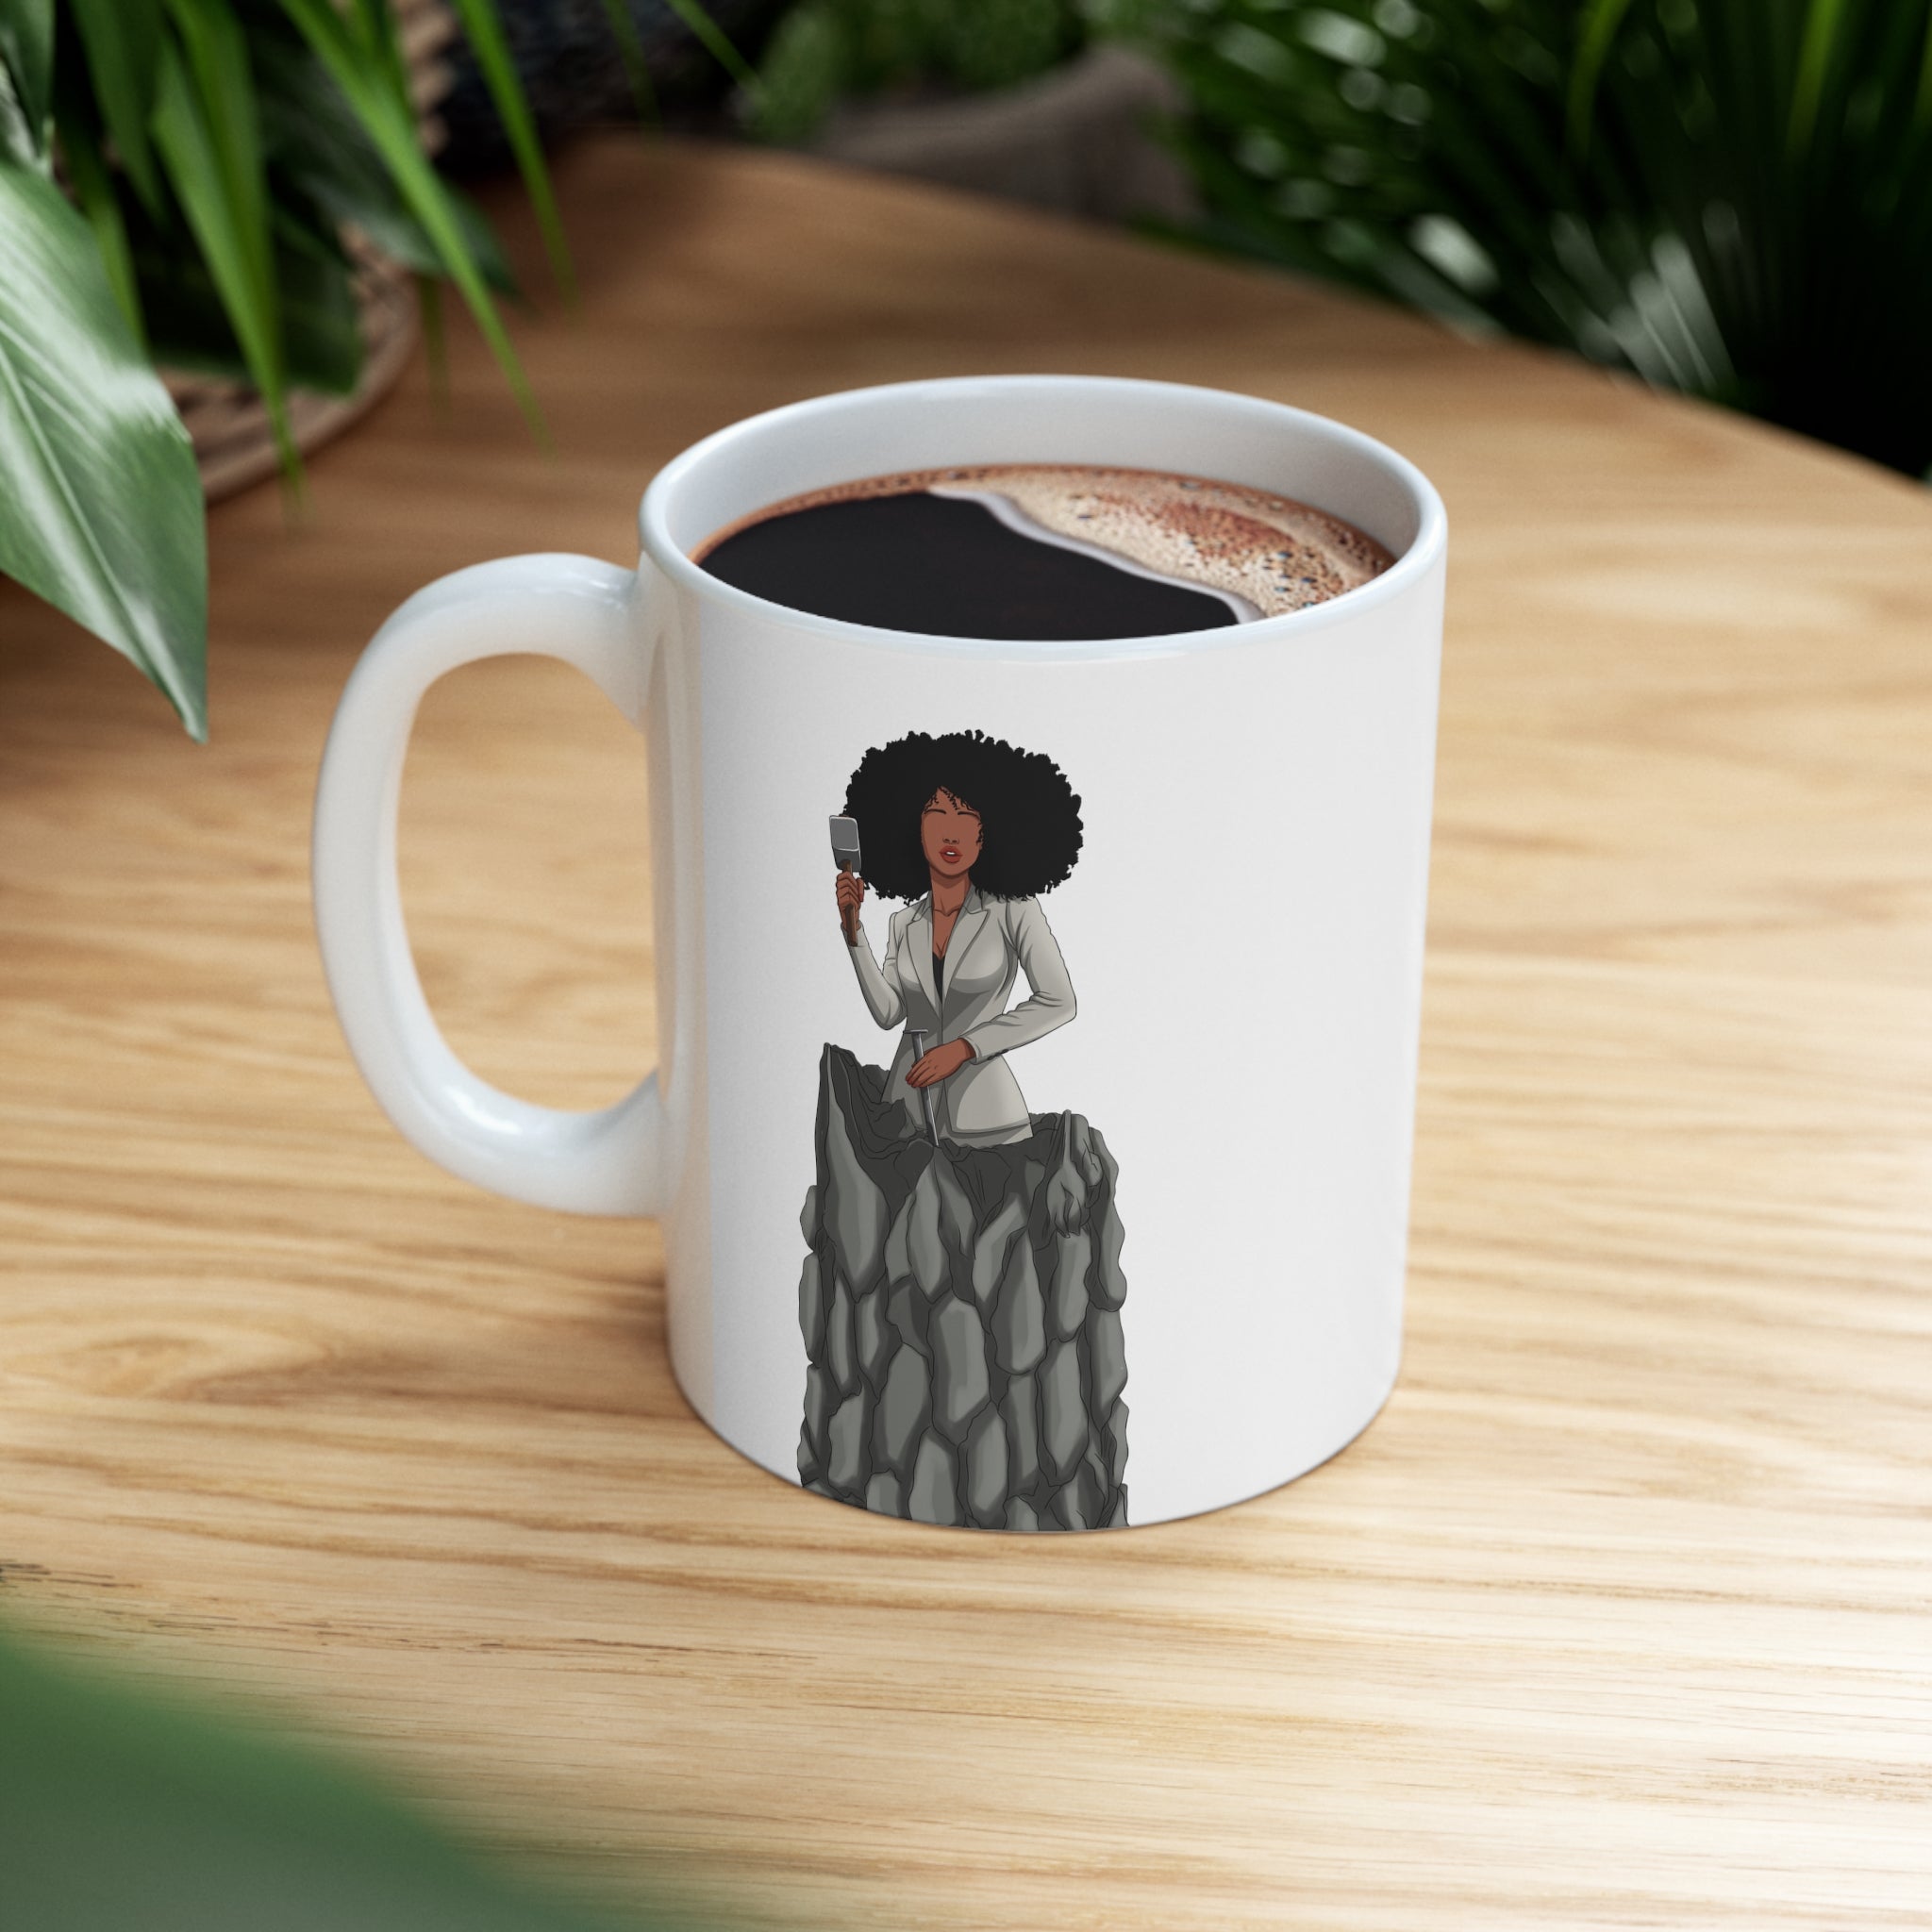 A person working hard to better his/herself - Ceramic Mug 11oz - Self-Made Woman #6 - Breakthrough Collection